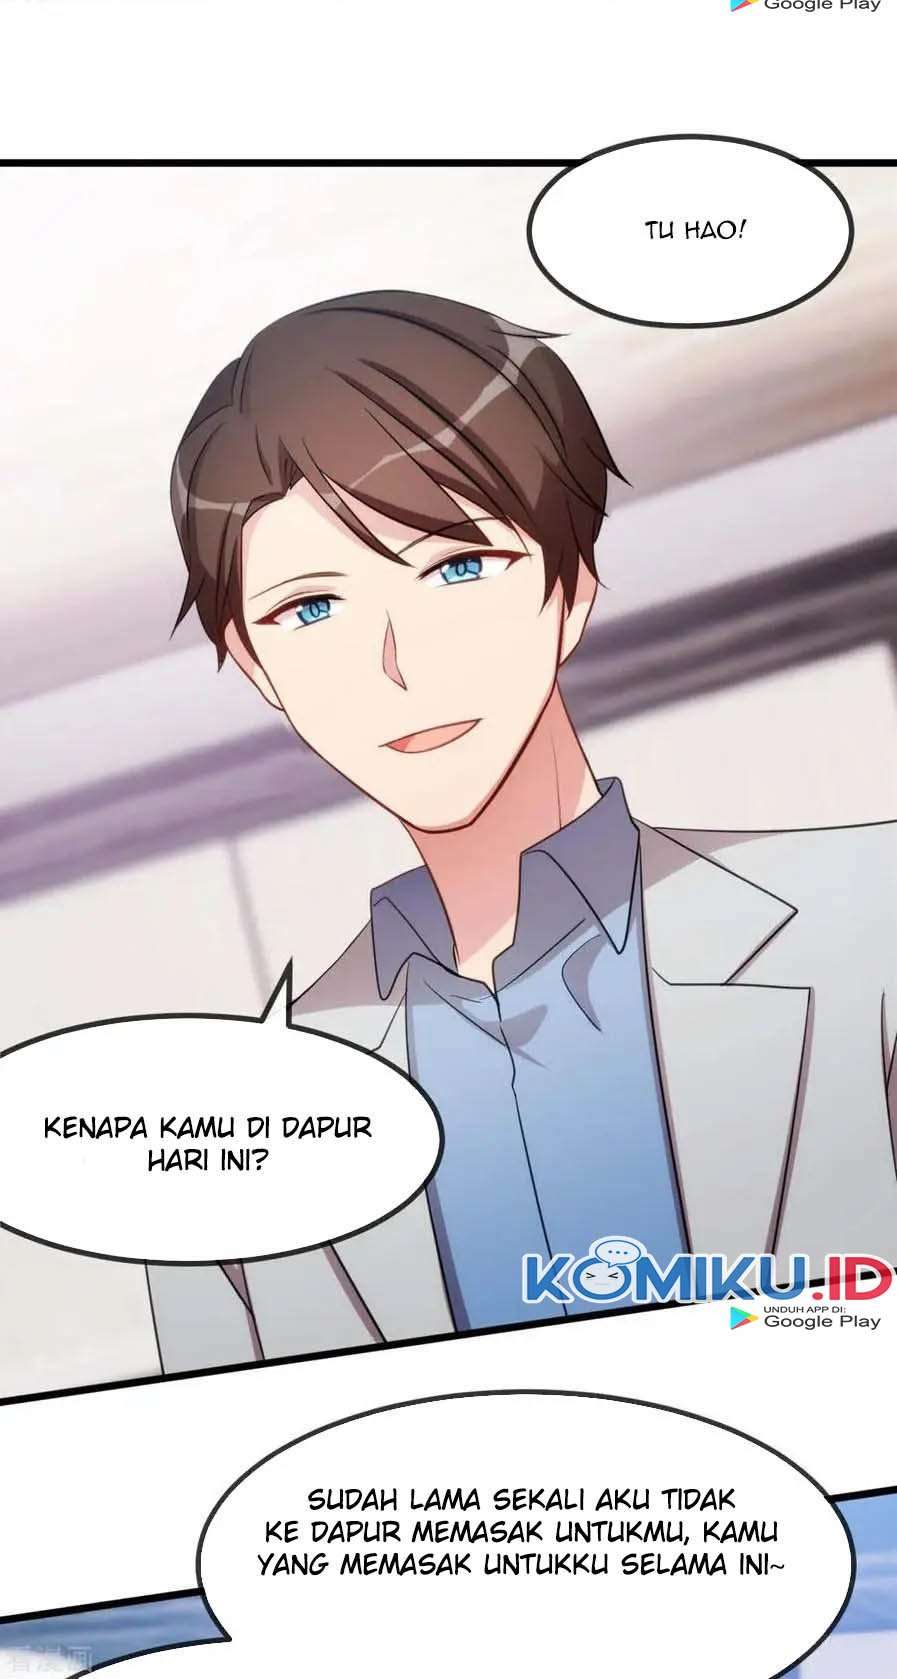 CEO’s Sudden Proposal Chapter 255